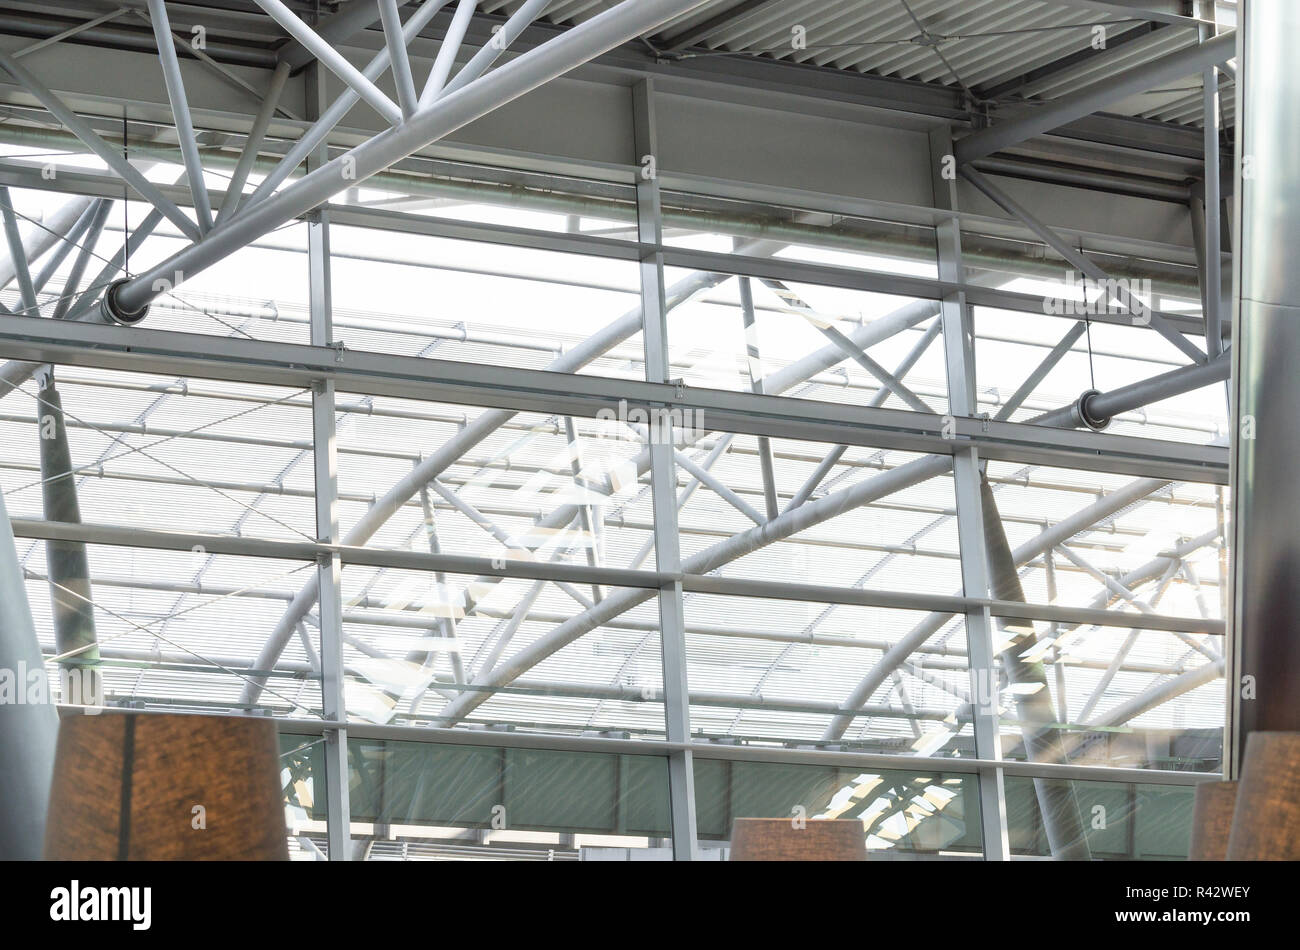 glass roof,steel structure Stock Photo